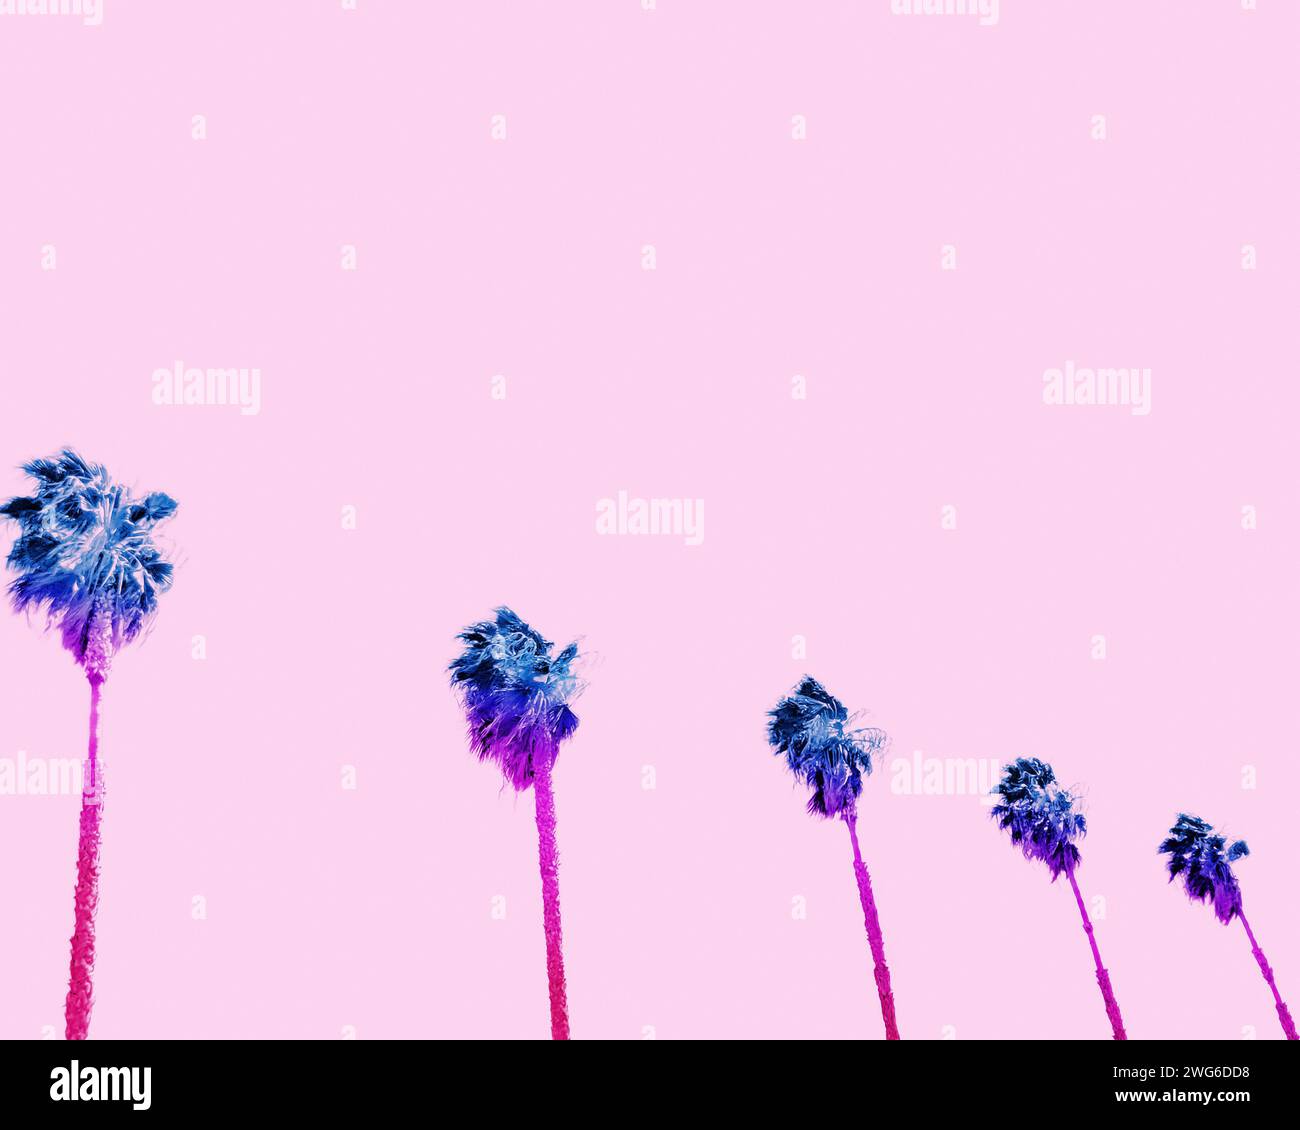 Row of palm trees with a pink sky in Southern California Stock Photo